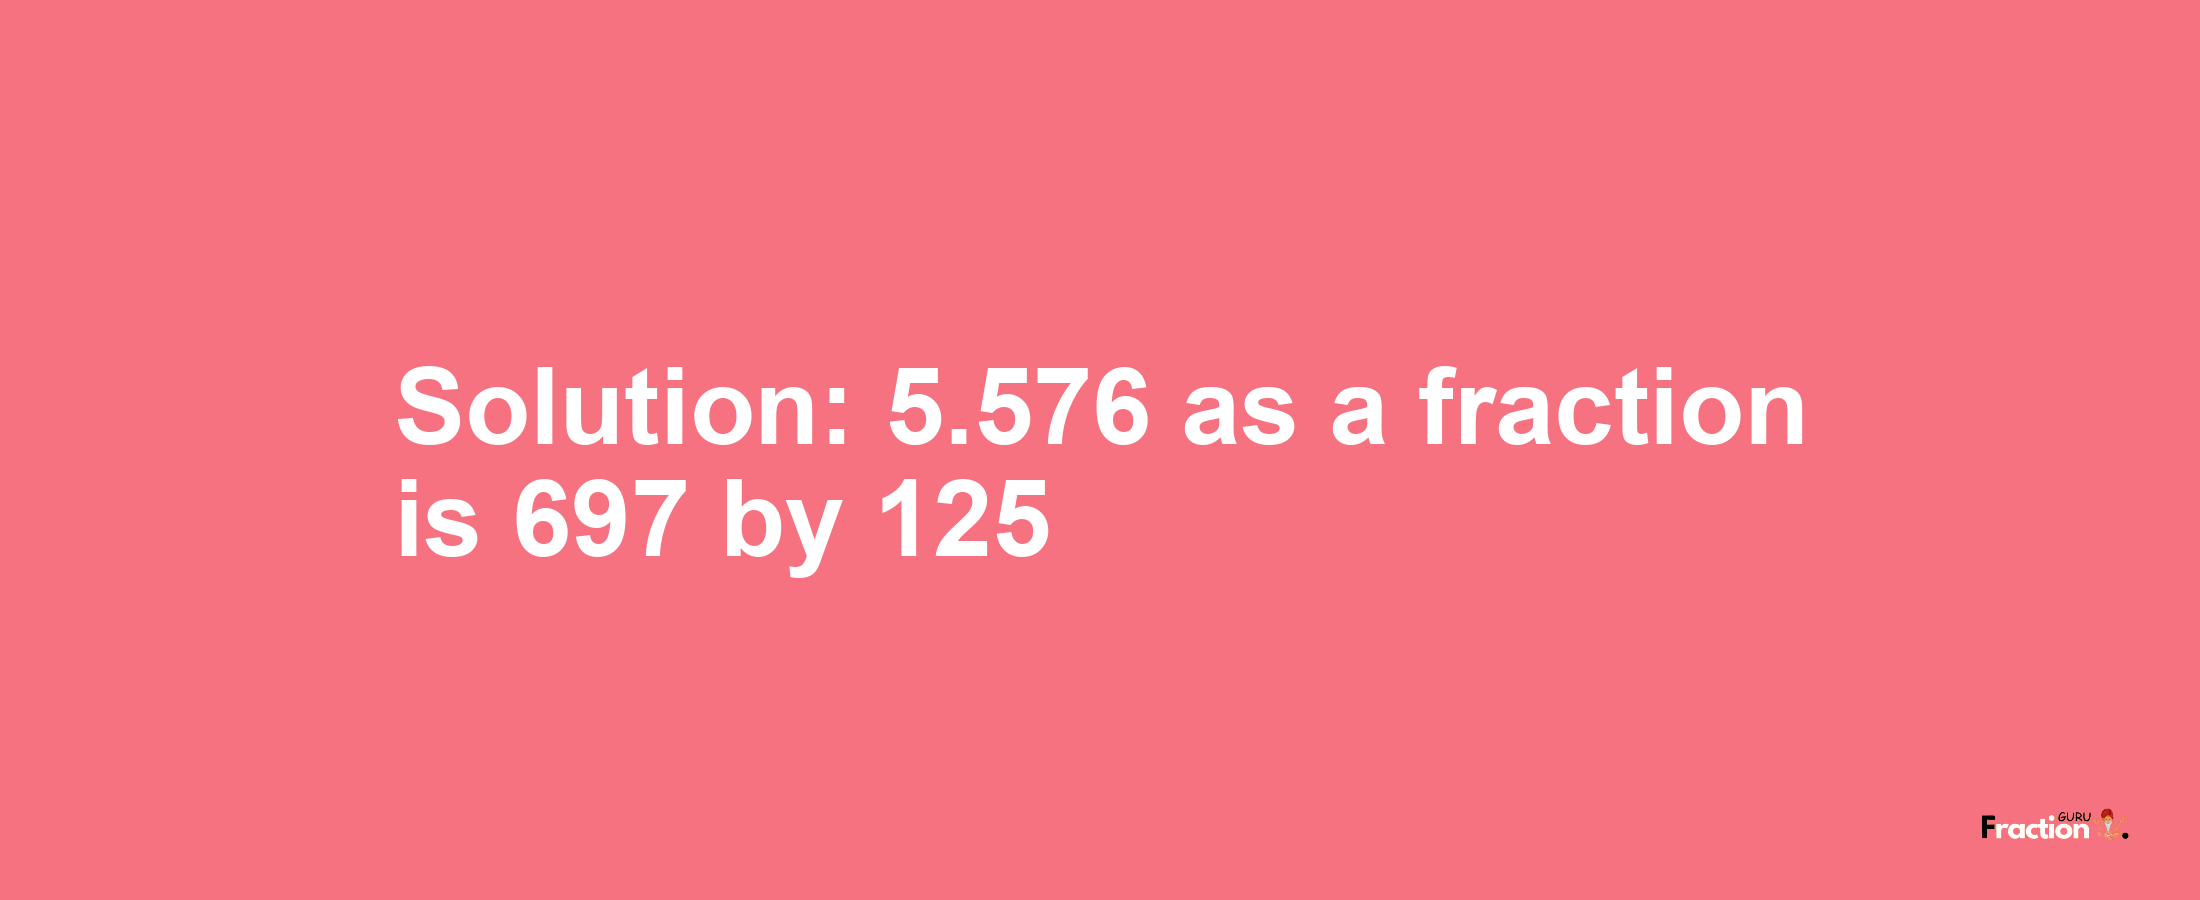 Solution:5.576 as a fraction is 697/125